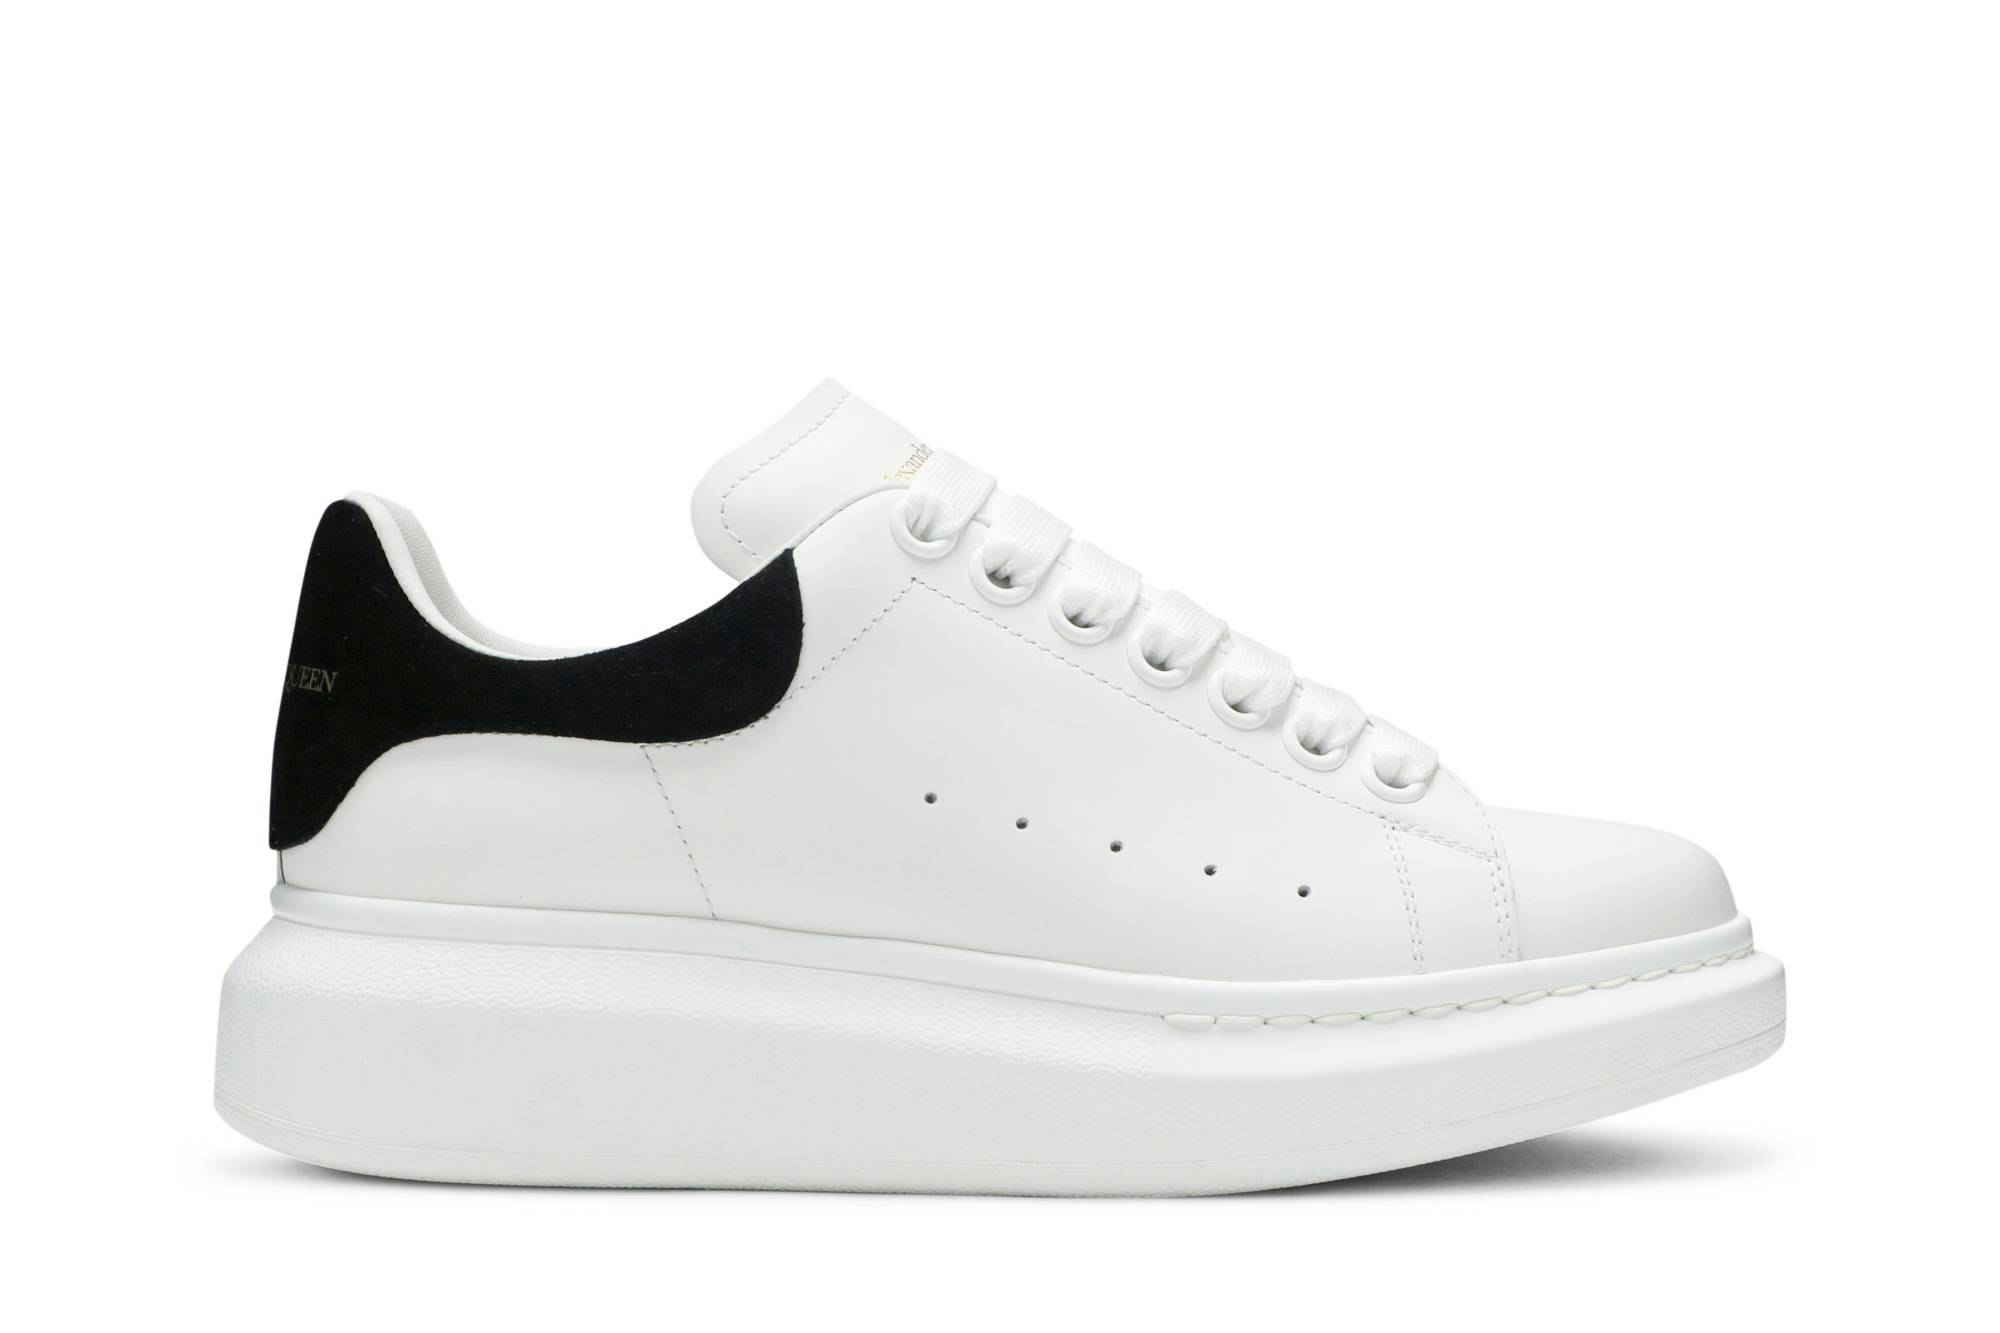 Buy Alexander McQueen Oversized Sneaker 'Perforated - White Multi-Color' -  682395 WIAFZ 9035 | GOAT